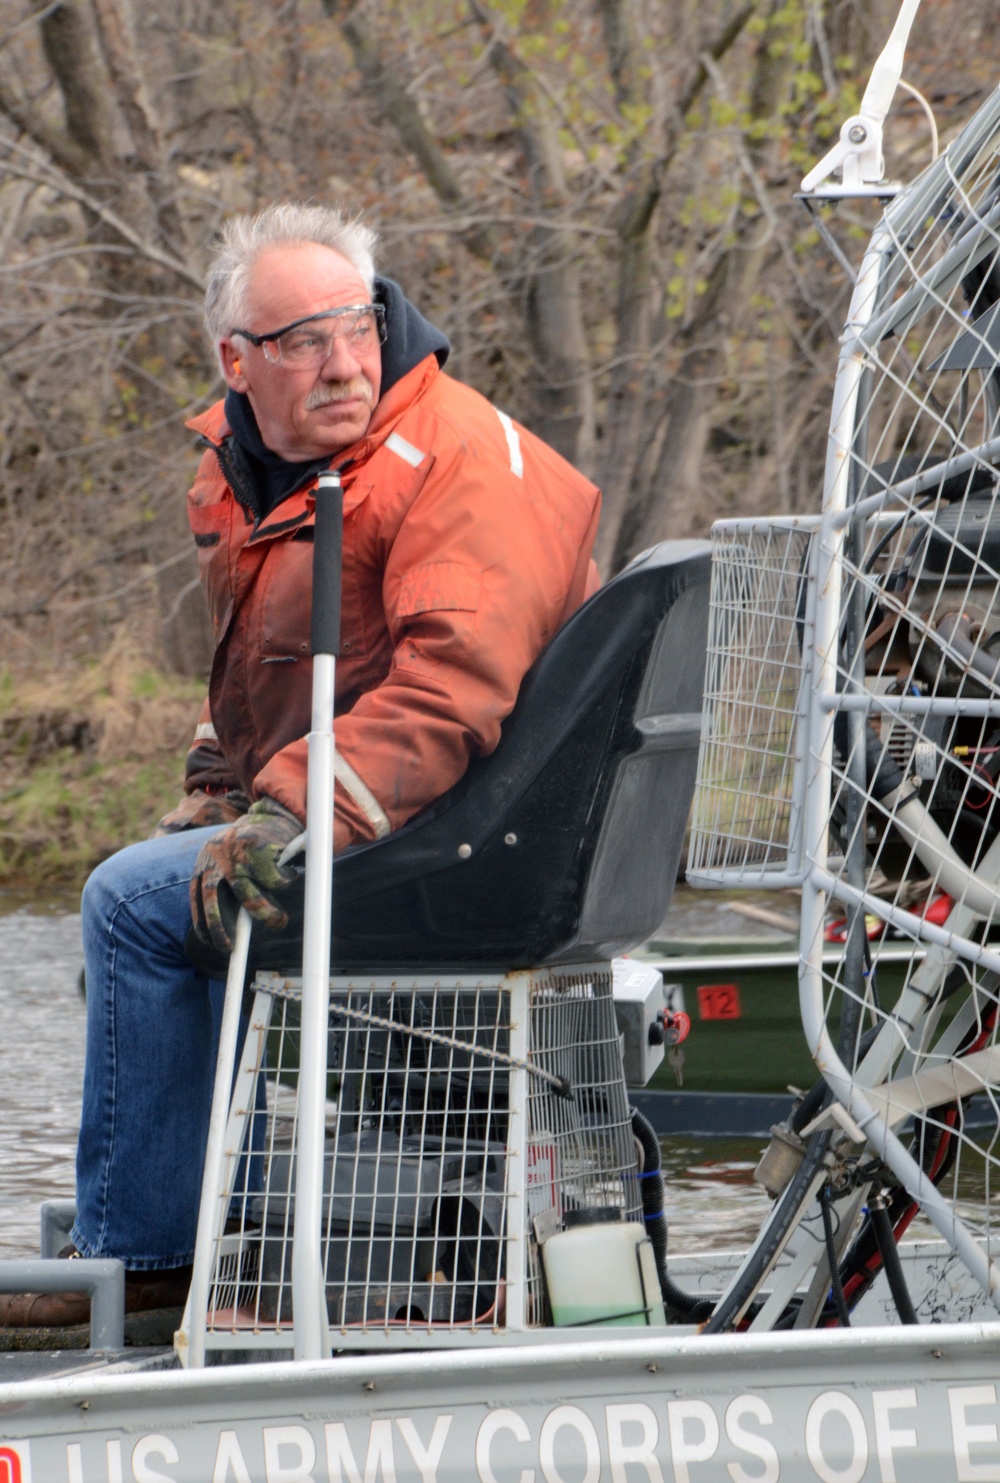 Corps, fire department use airboats for cold water training